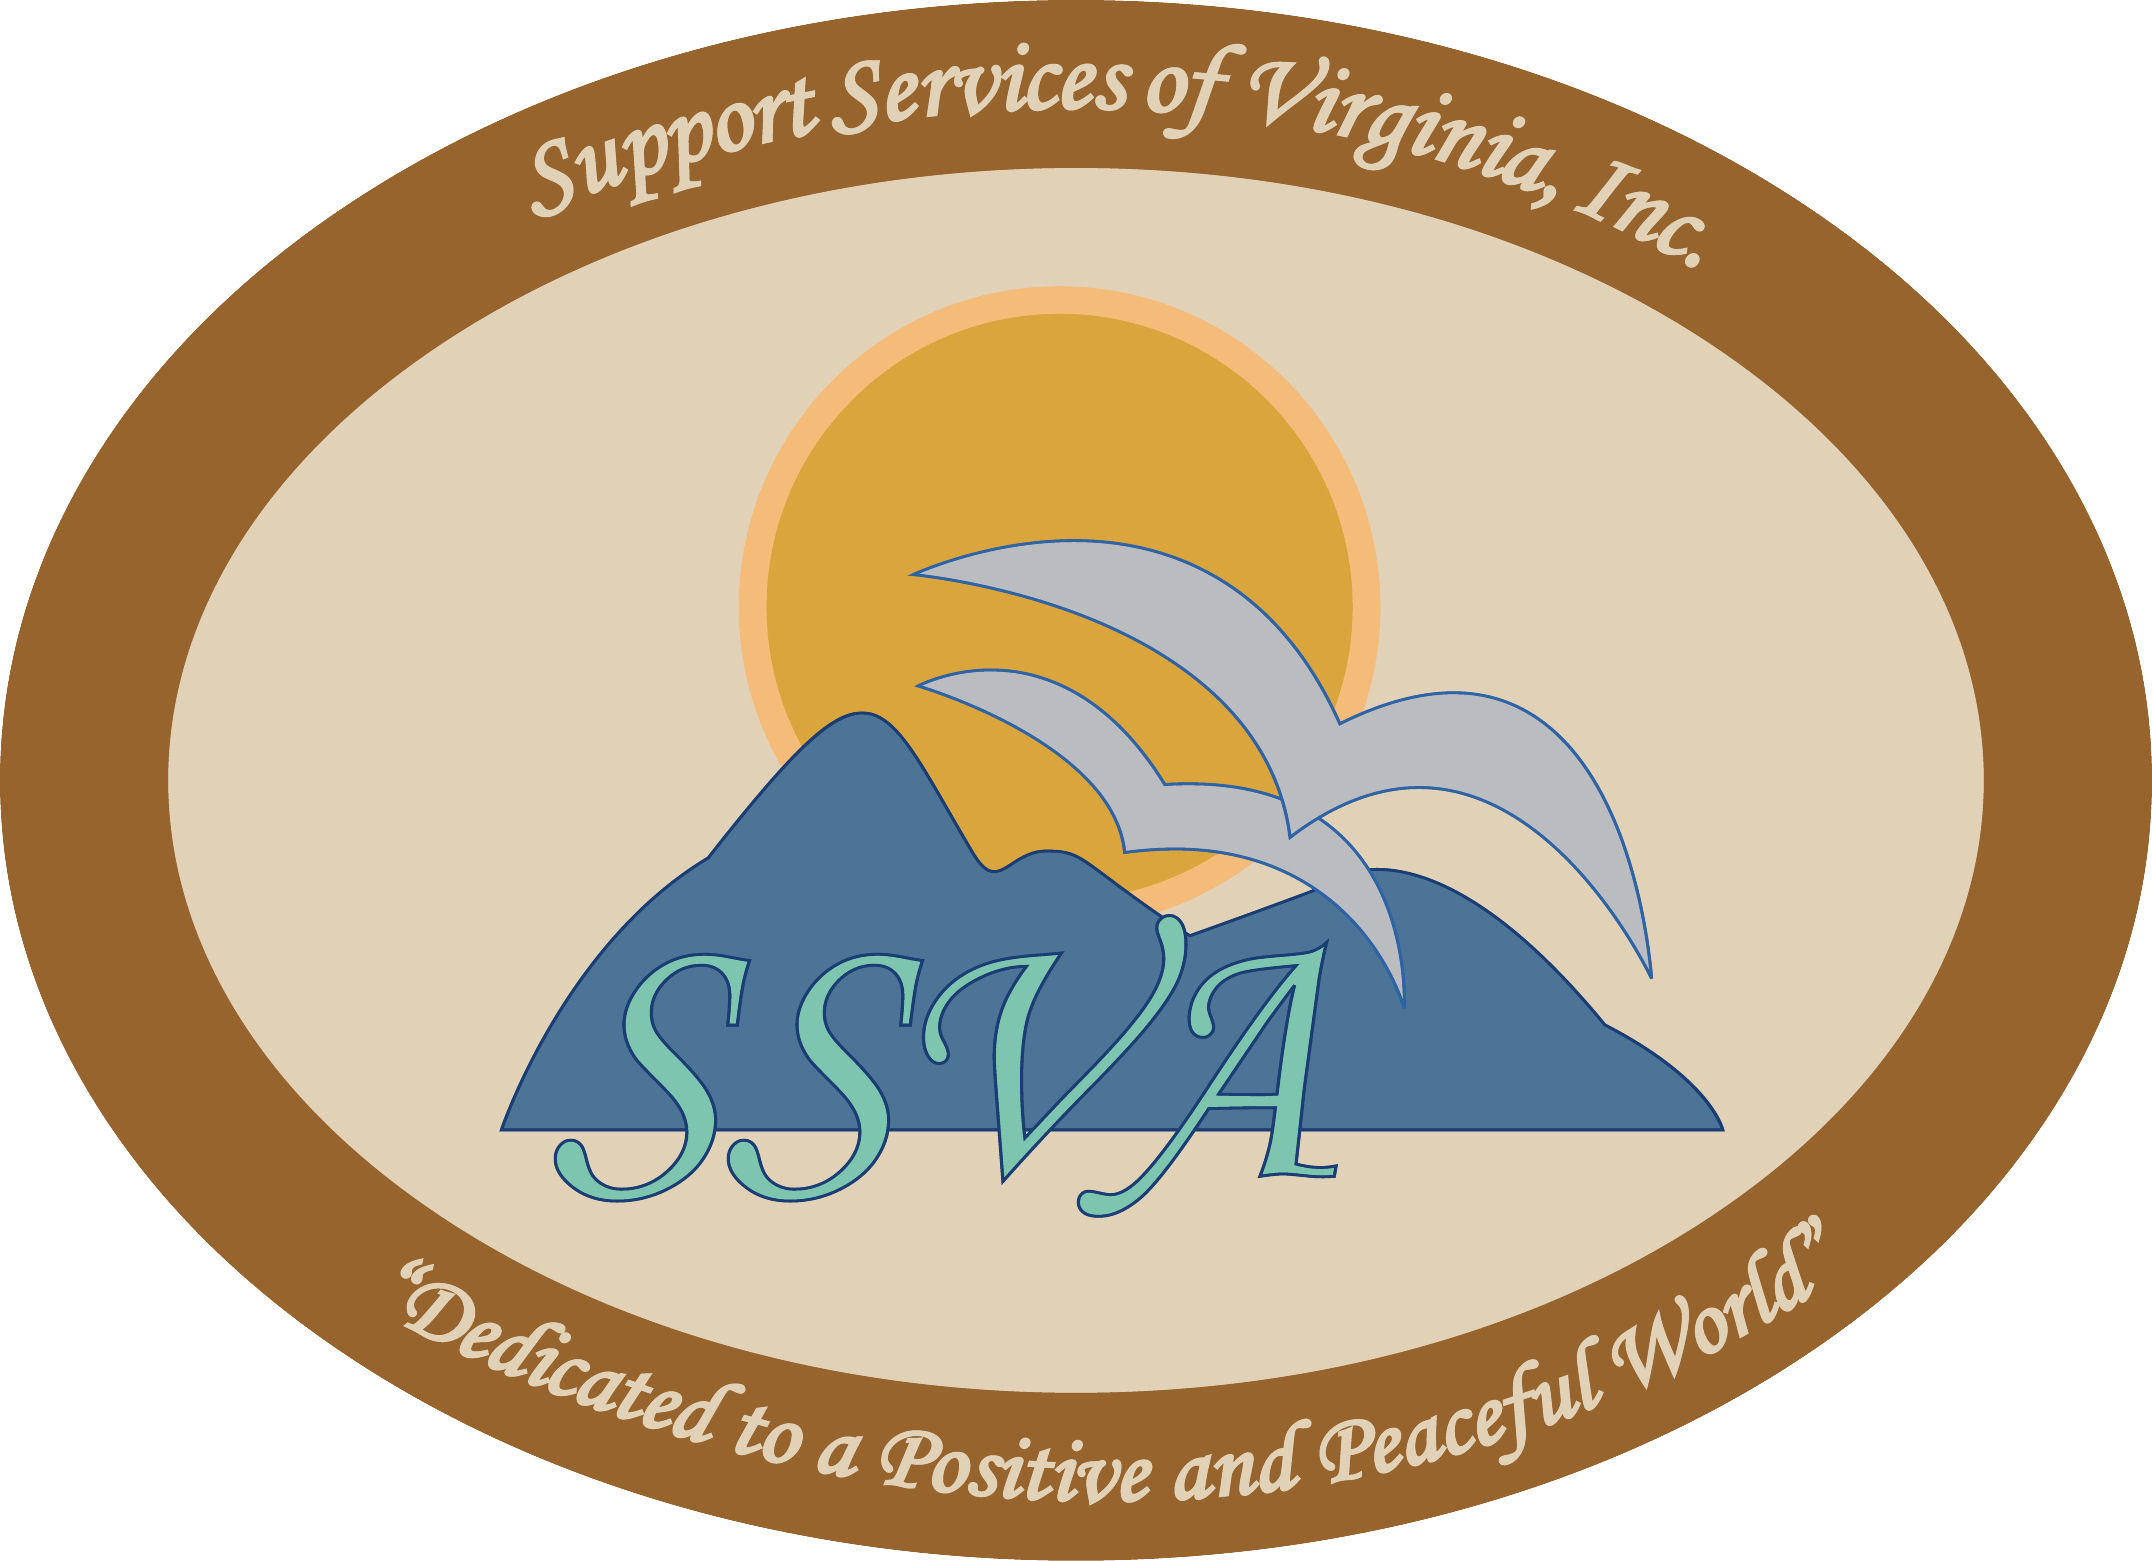 Support Services of Virginia, Inc. logo